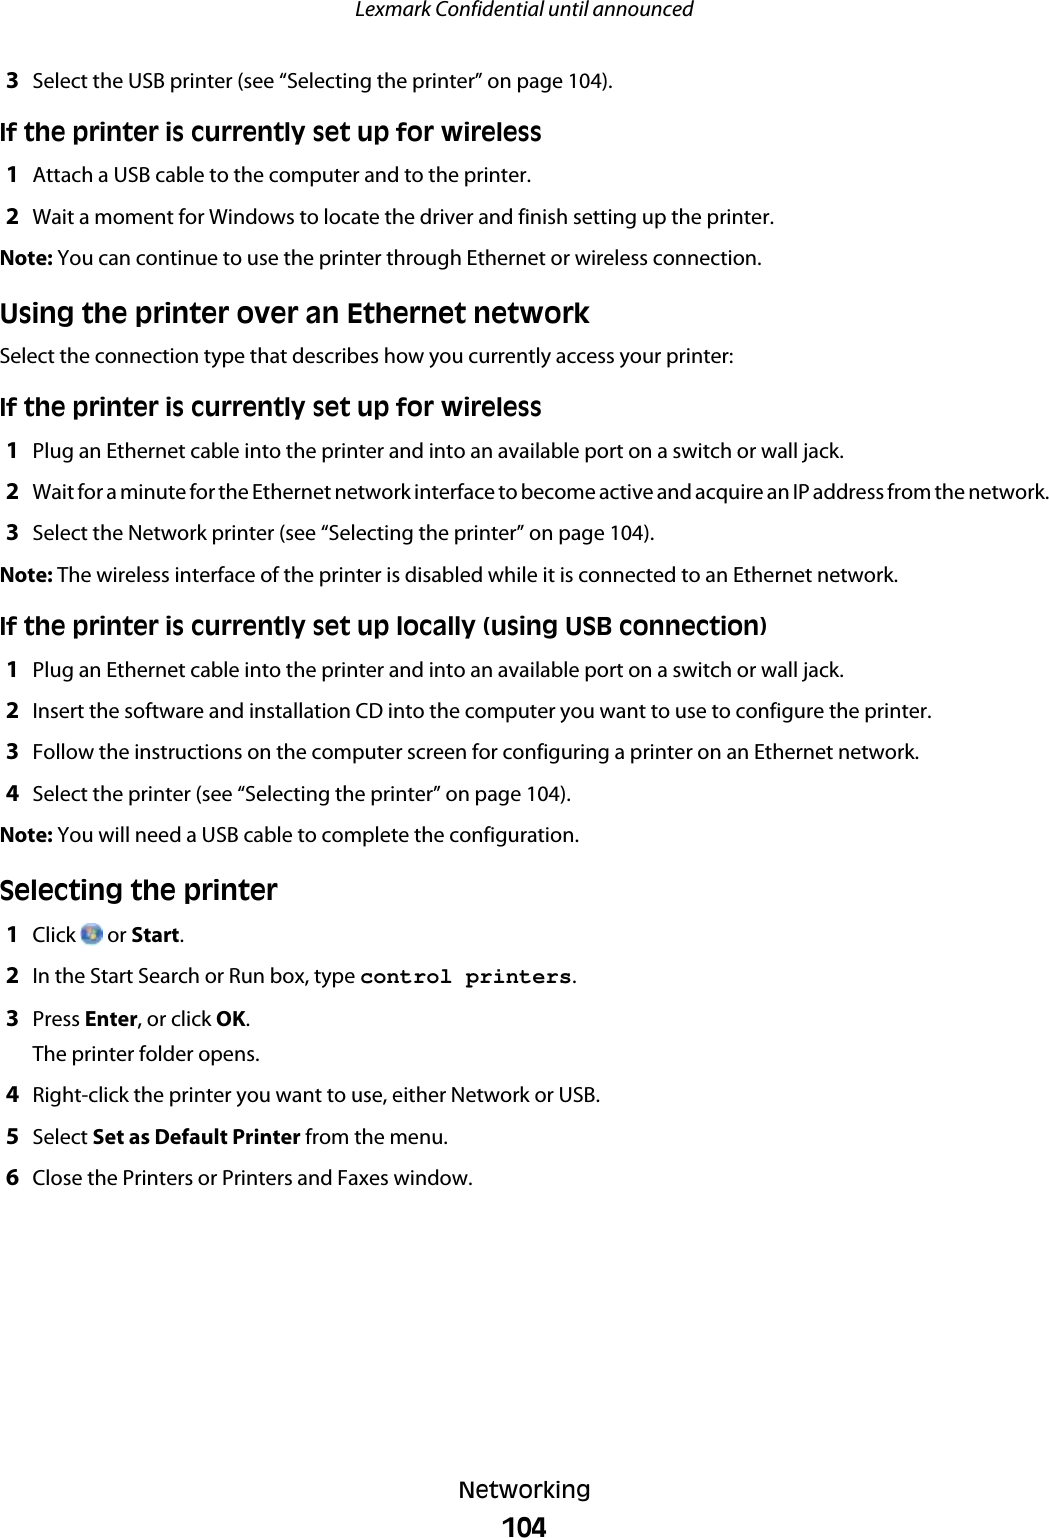 3Select the USB printer (see “Selecting the printer” on page 104).If the printer is currently set up for wireless1Attach a USB cable to the computer and to the printer.2Wait a moment for Windows to locate the driver and finish setting up the printer.Note: You can continue to use the printer through Ethernet or wireless connection.Using the printer over an Ethernet networkSelect the connection type that describes how you currently access your printer:If the printer is currently set up for wireless1Plug an Ethernet cable into the printer and into an available port on a switch or wall jack.2Wait for a minute for the Ethernet network interface to become active and acquire an IP address from the network.3Select the Network printer (see “Selecting the printer” on page 104).Note: The wireless interface of the printer is disabled while it is connected to an Ethernet network.If the printer is currently set up locally (using USB connection)1Plug an Ethernet cable into the printer and into an available port on a switch or wall jack.2Insert the software and installation CD into the computer you want to use to configure the printer.3Follow the instructions on the computer screen for configuring a printer on an Ethernet network.4Select the printer (see “Selecting the printer” on page 104).Note: You will need a USB cable to complete the configuration.Selecting the printer1Click   or Start.2In the Start Search or Run box, type control printers.3Press Enter, or click OK.The printer folder opens.4Right-click the printer you want to use, either Network or USB.5Select Set as Default Printer from the menu.6Close the Printers or Printers and Faxes window.Lexmark Confidential until announcedNetworking104